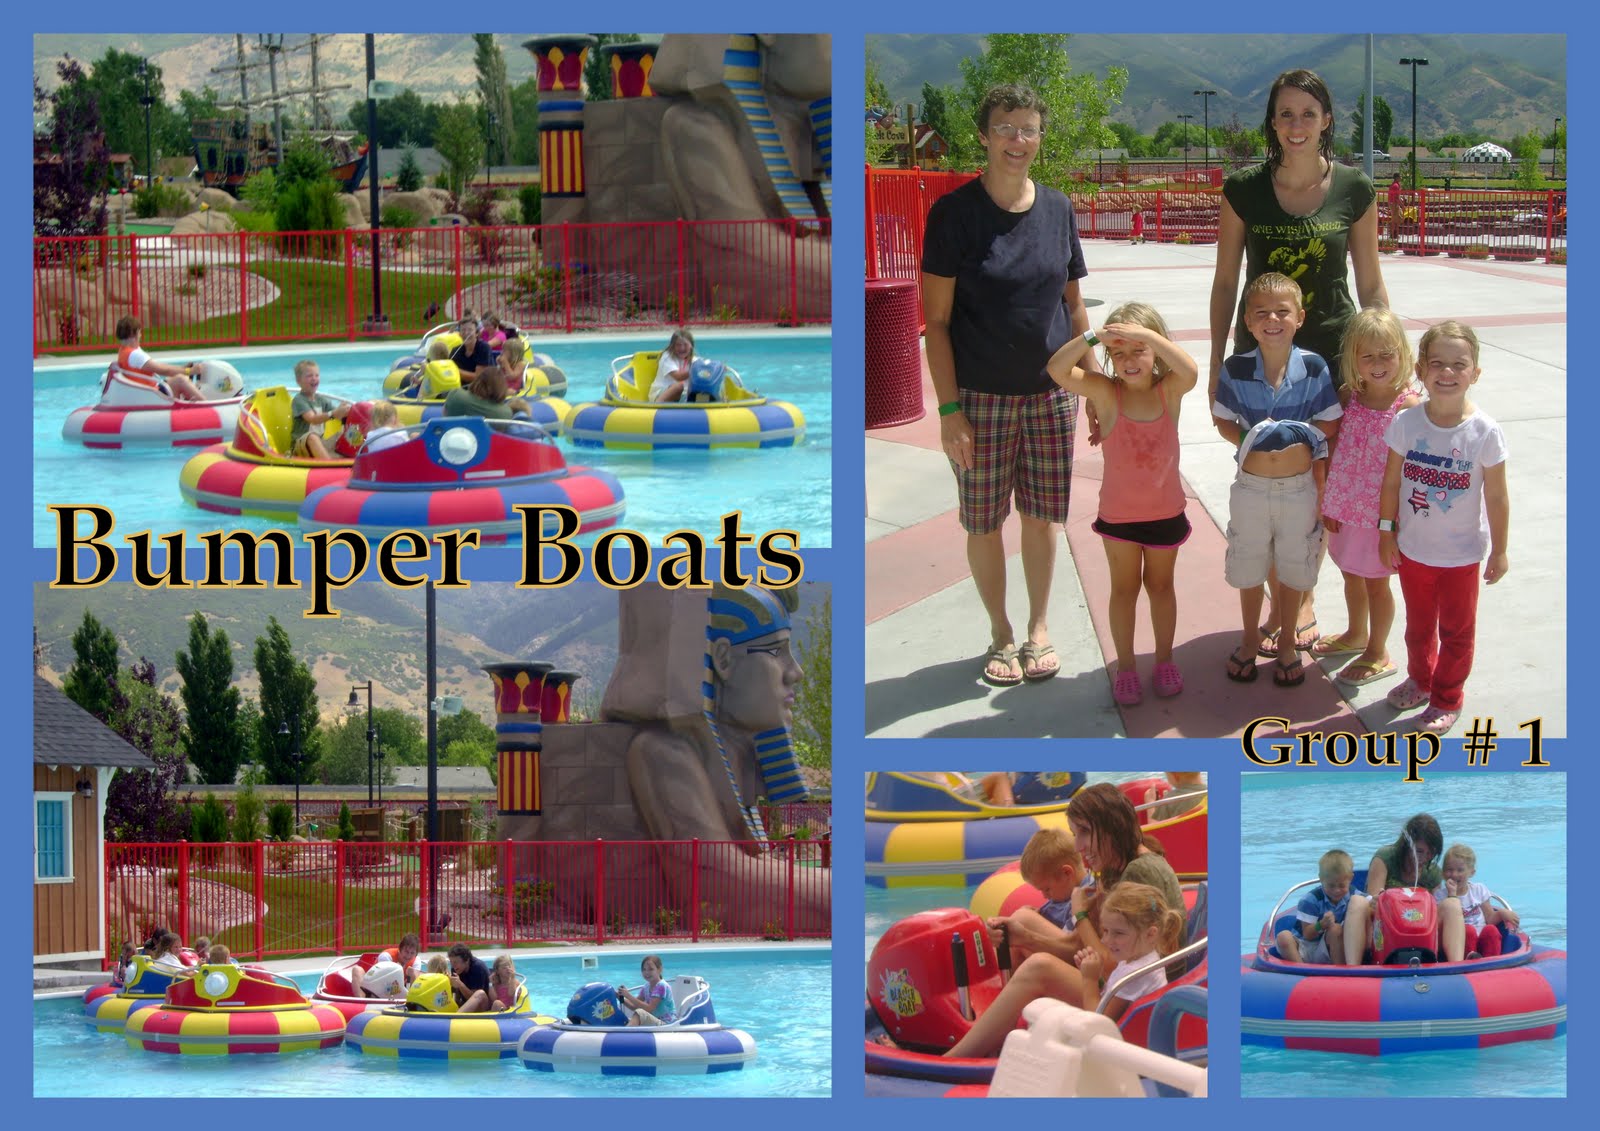 The Water Bumper Boats Were A Hit They All Went On Them Few Times